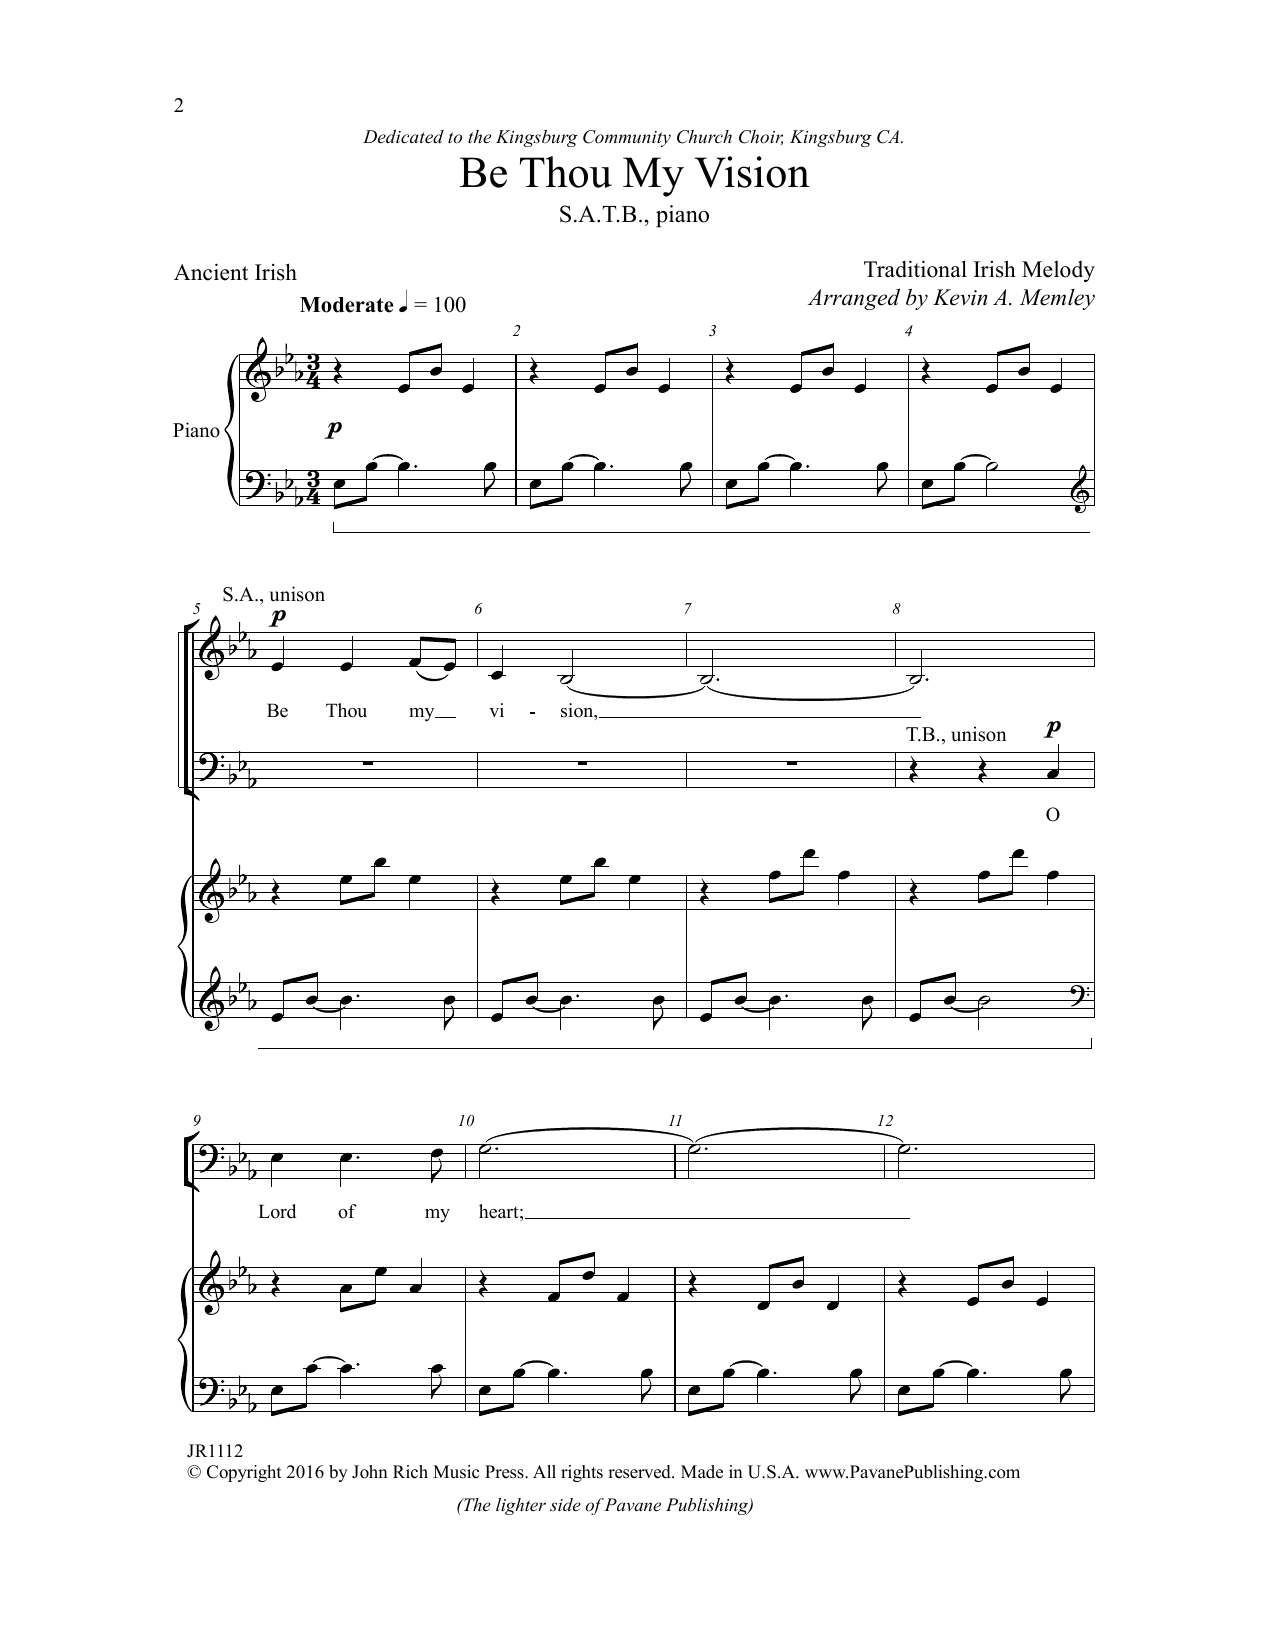 Download Kevin Memley Be Thou My Vision Sheet Music